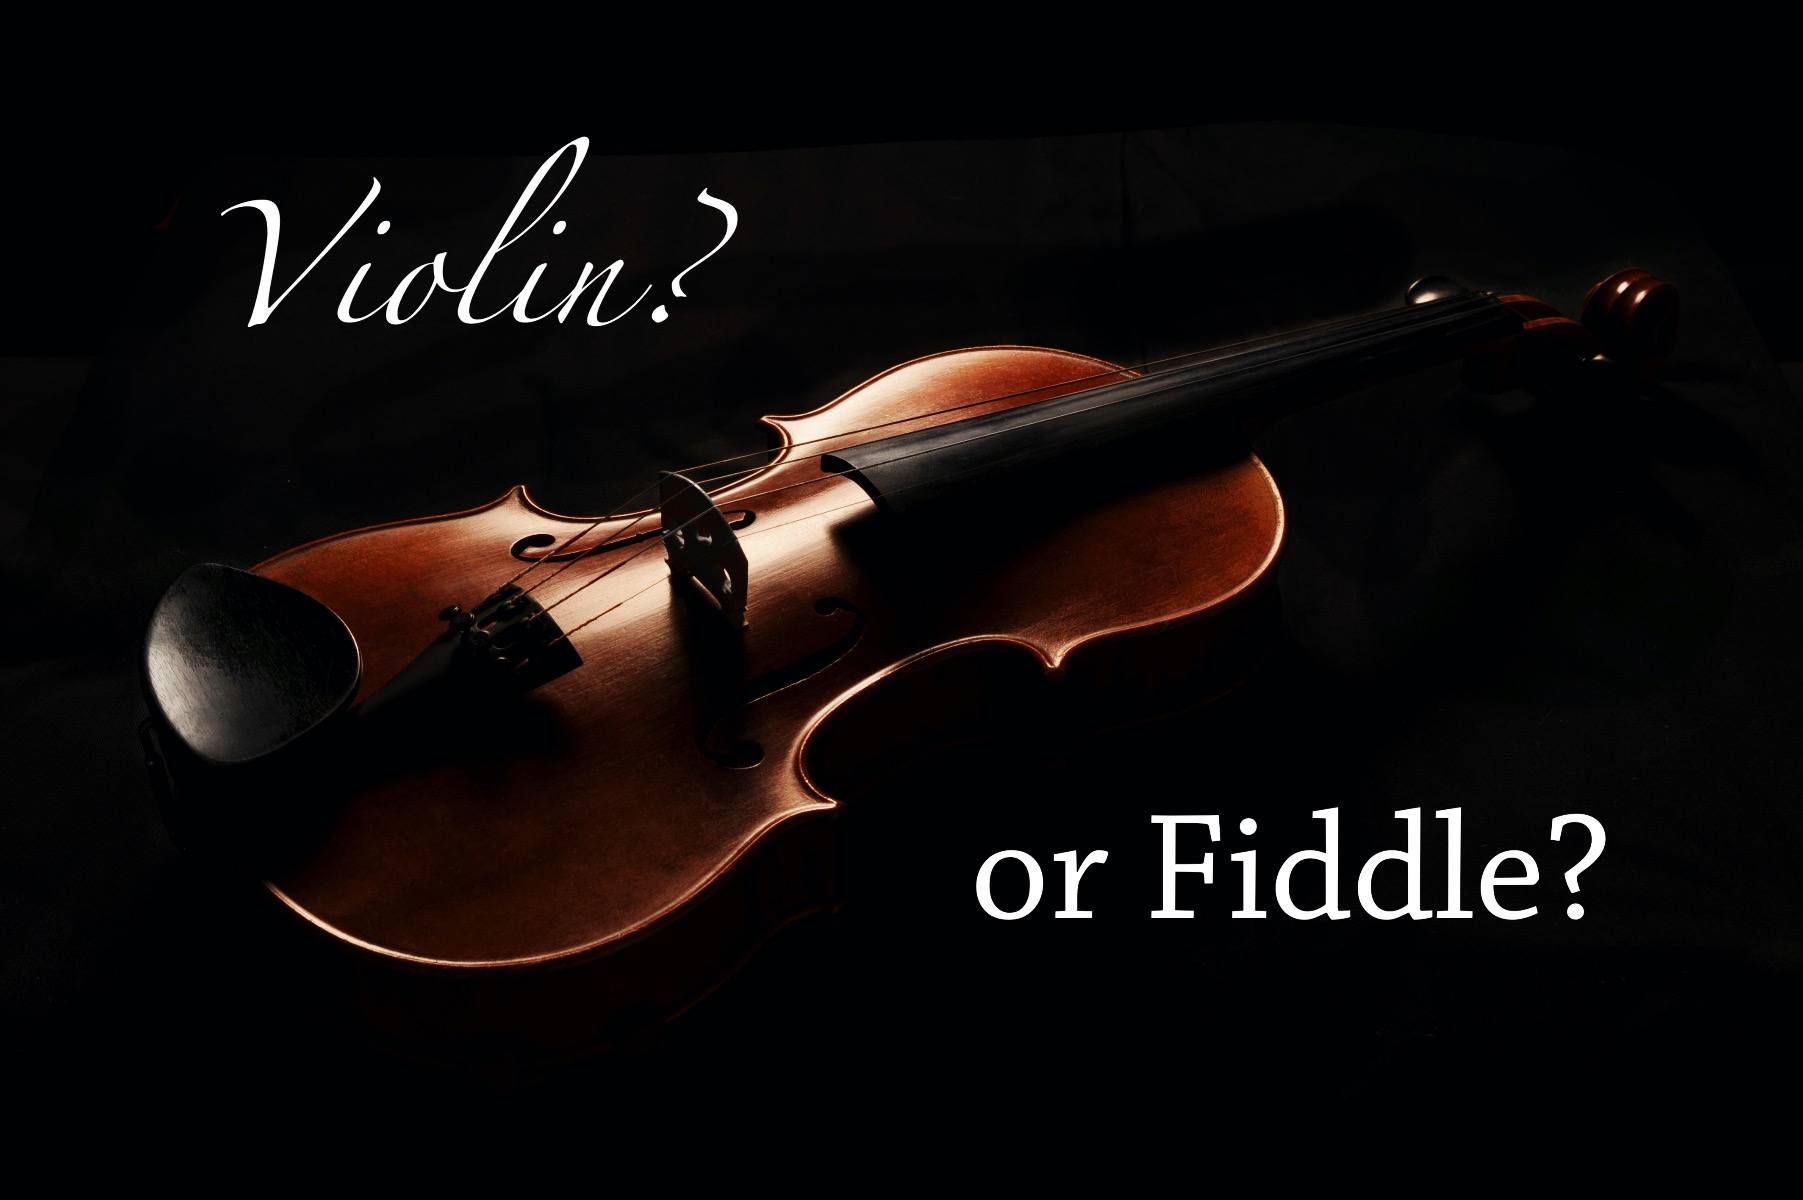 violin under dramatic lighting with text 